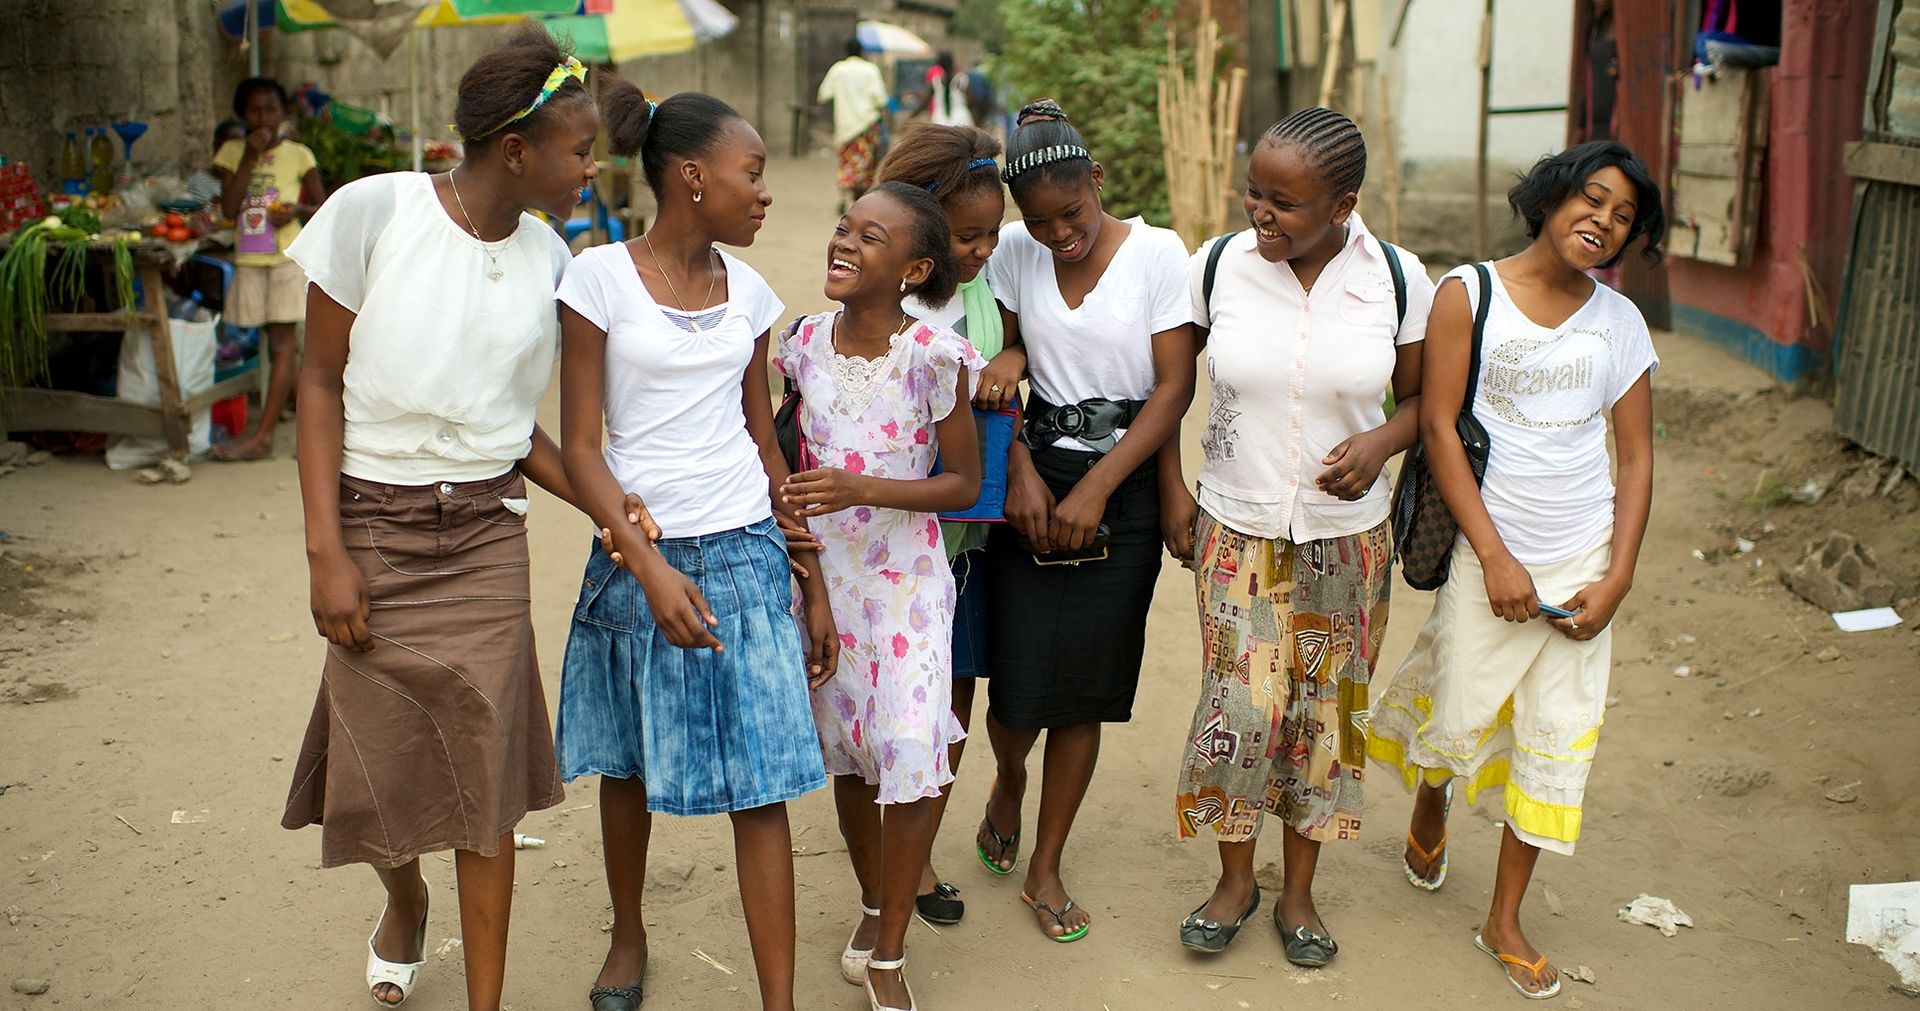 A group of women and young women from the Democratic Republic of the Congo (DRC) in Africa walking together enjoying each others company.  There is a street in the background.